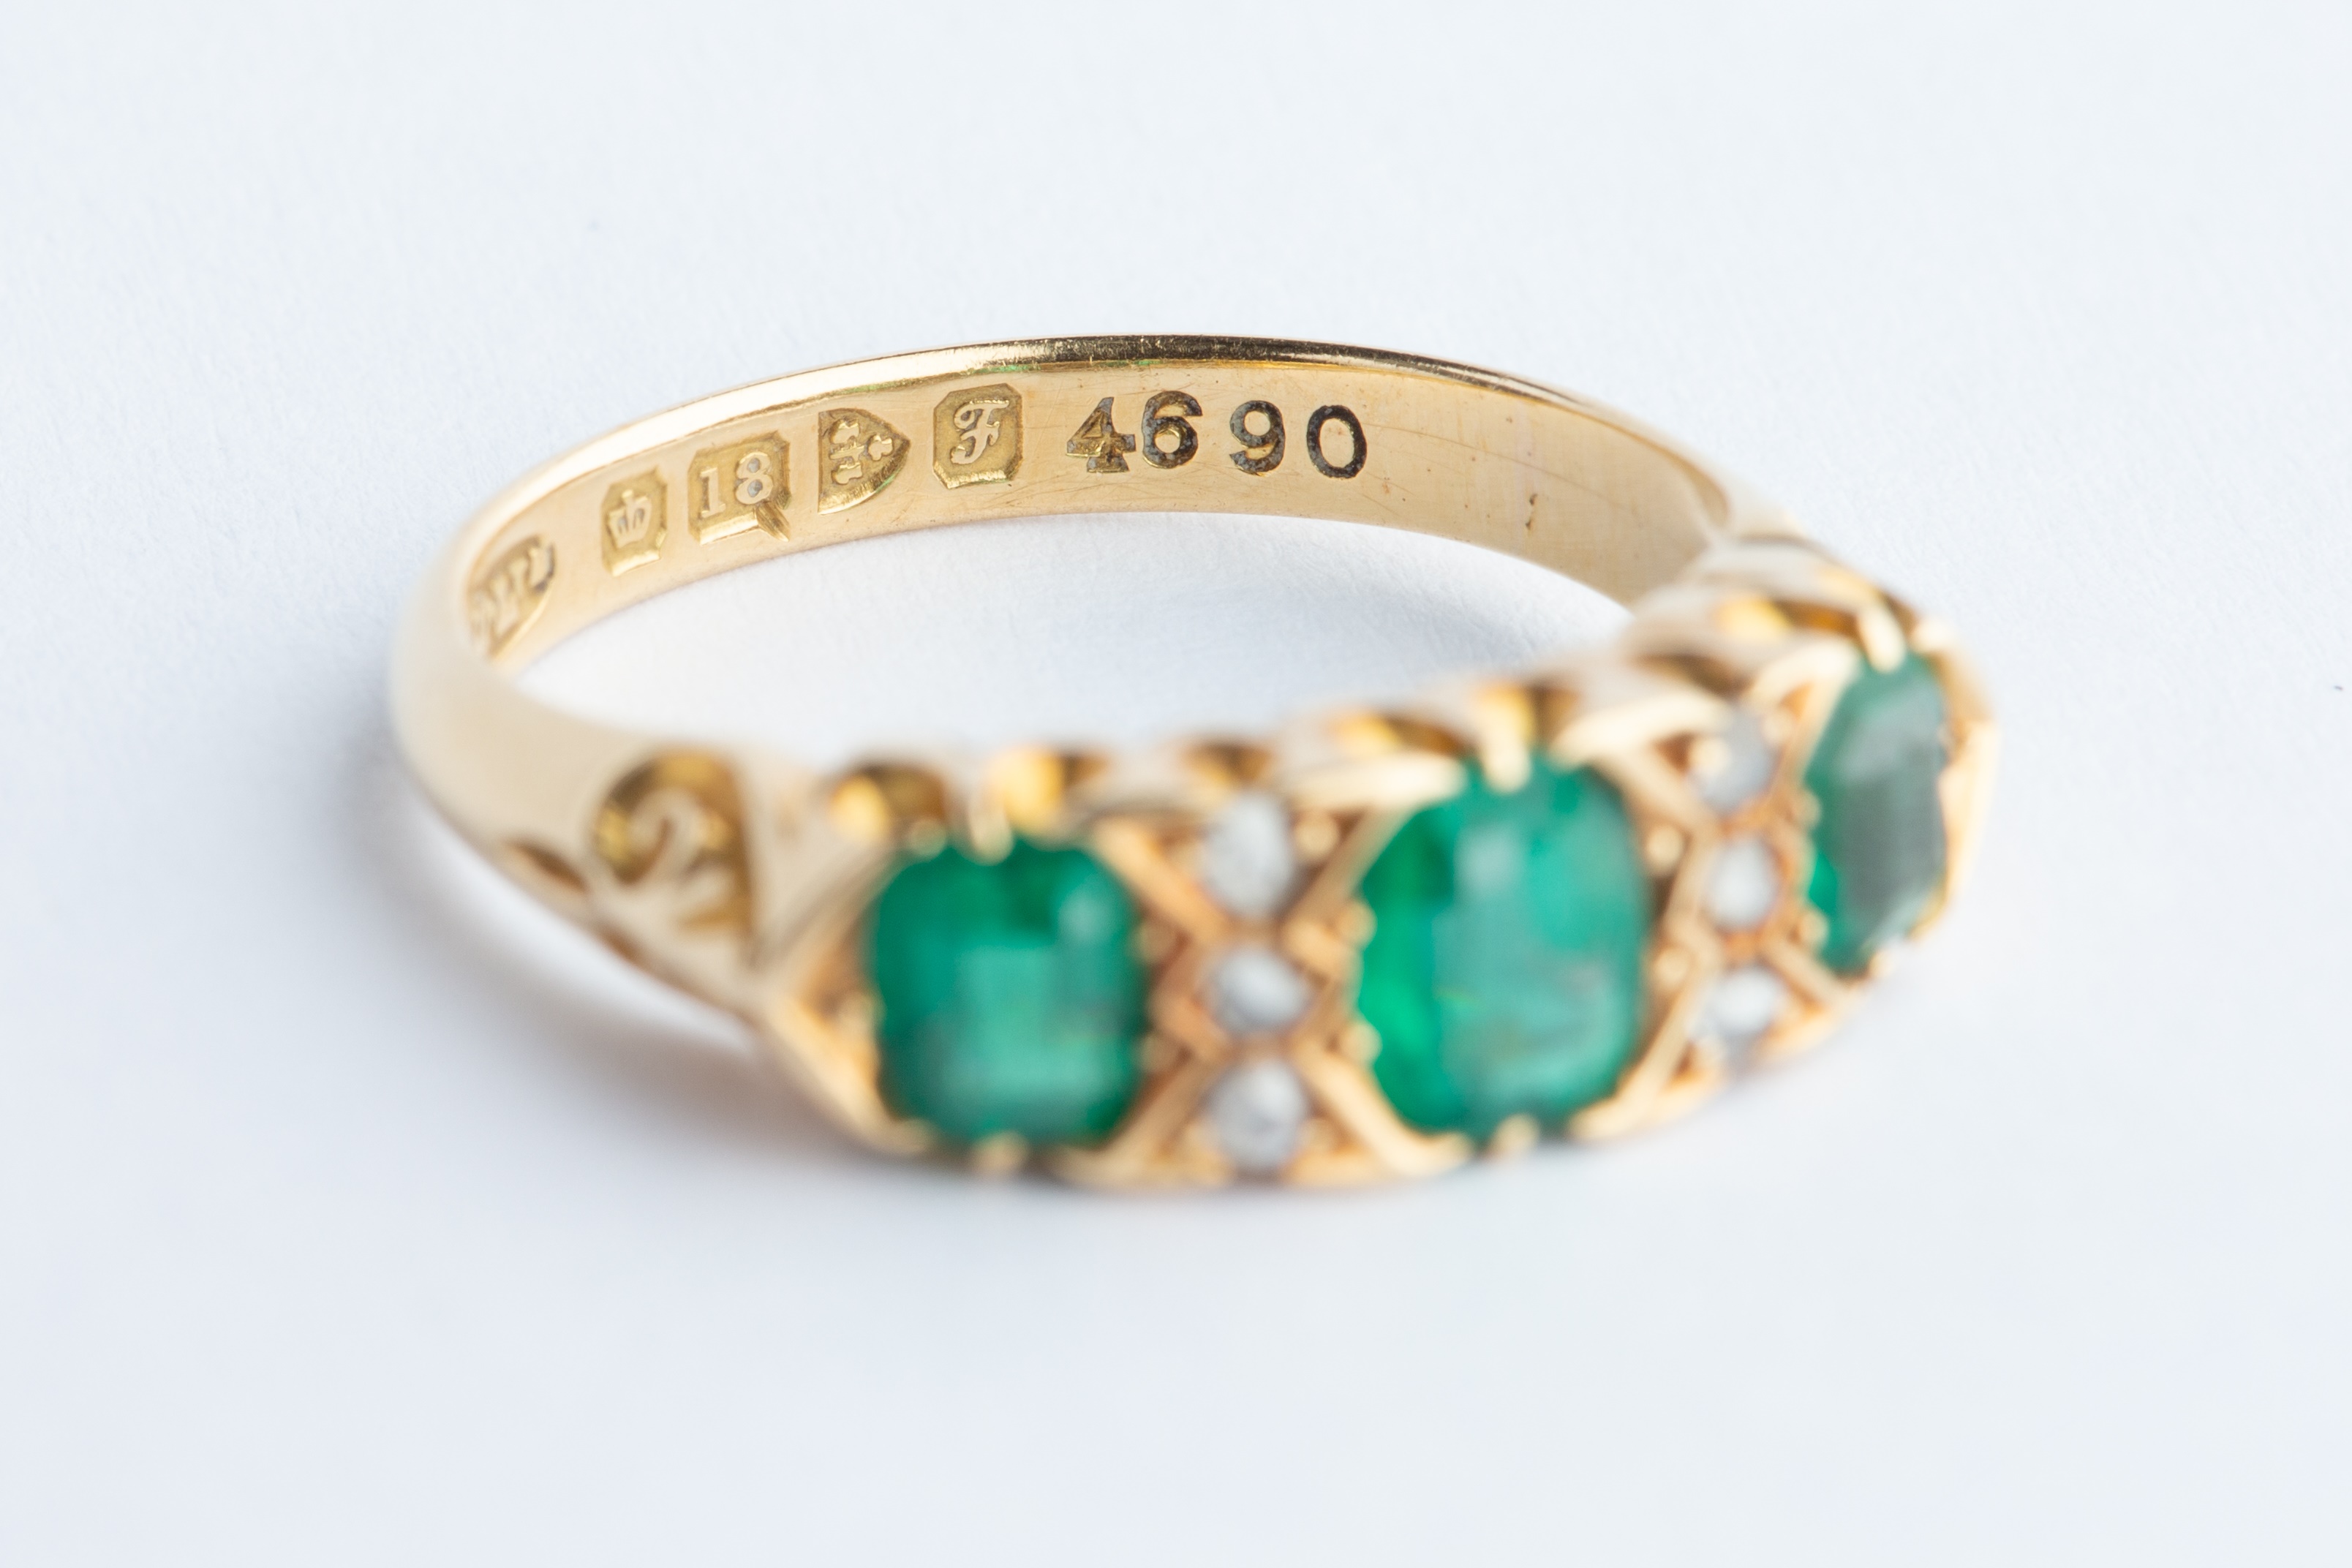 An 18ct Gold Emerald & Diamond Ring, - Image 6 of 7